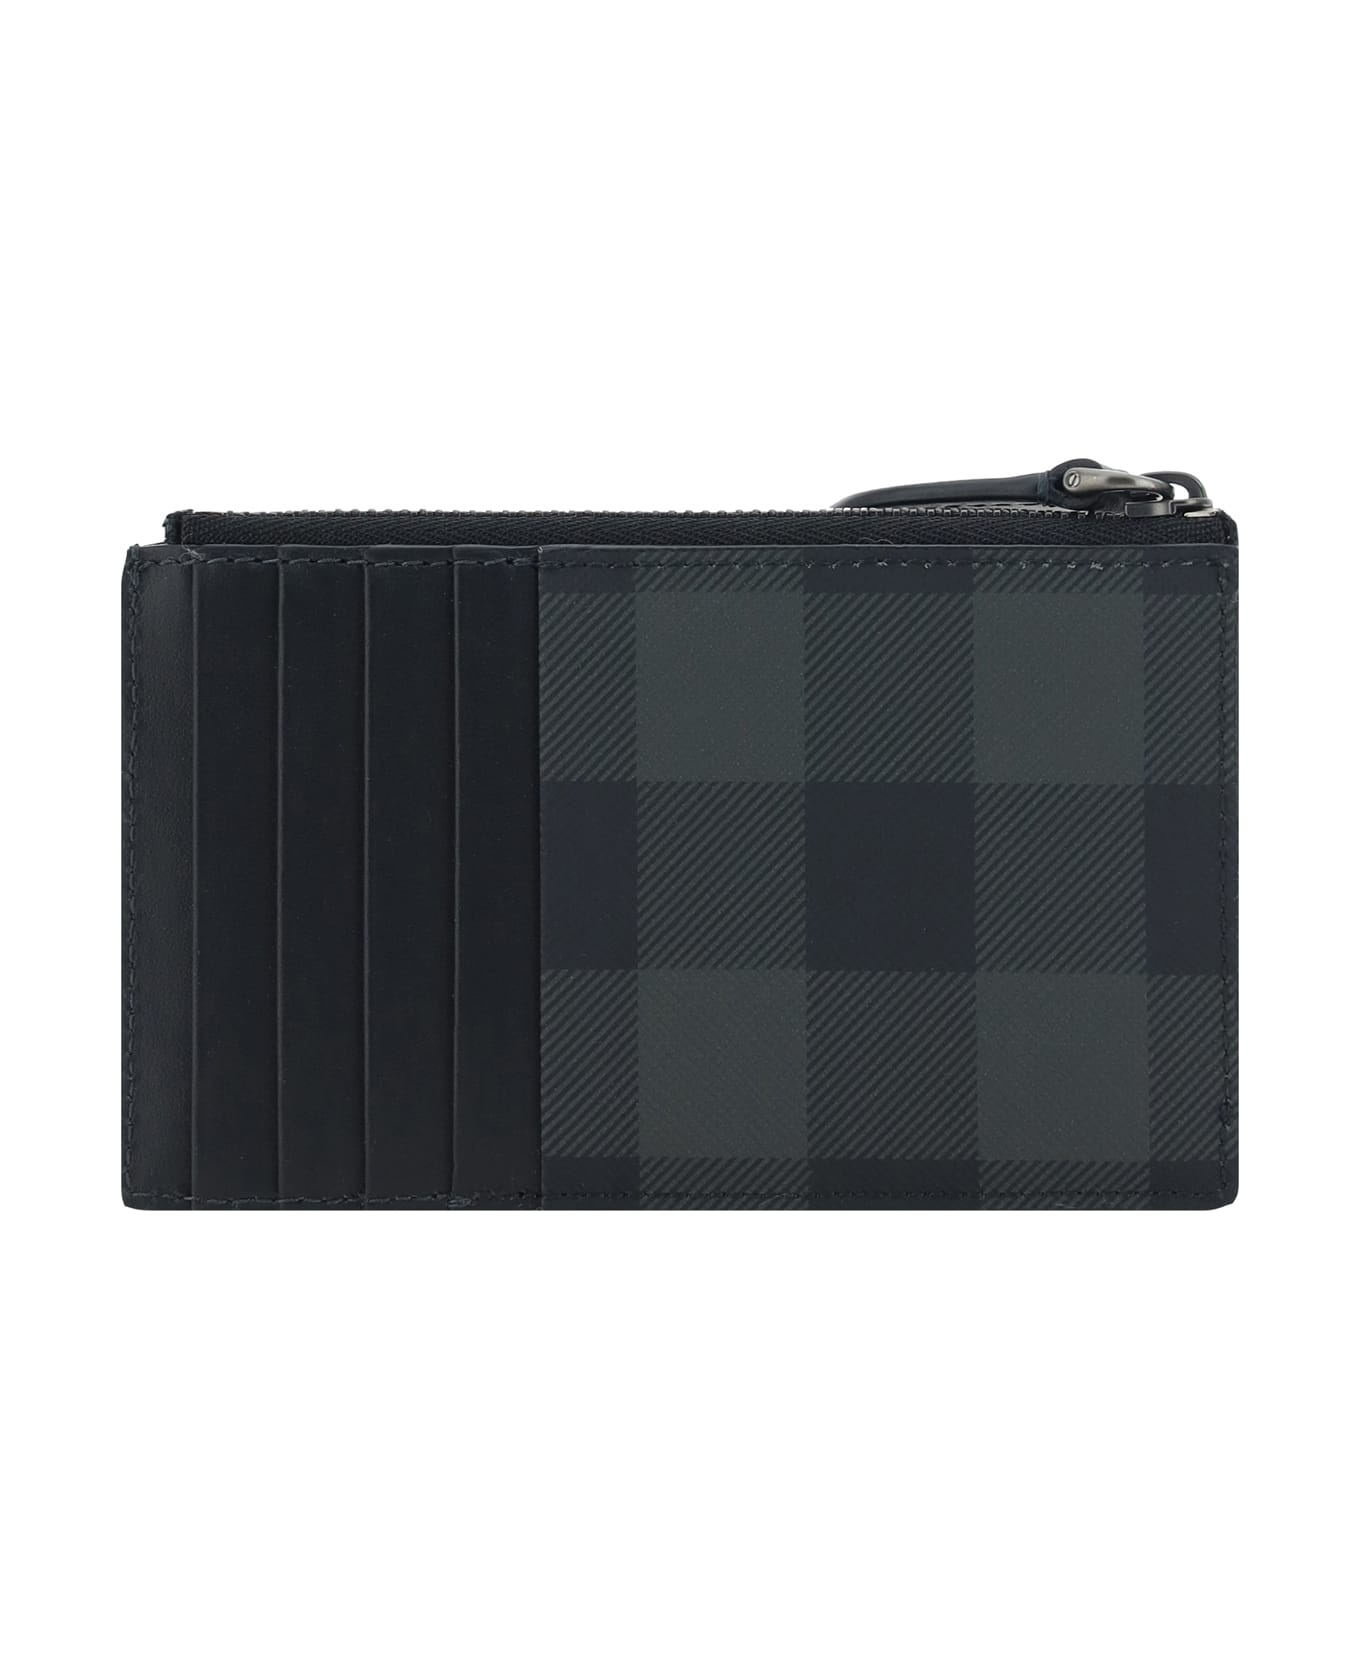 Burberry Coin Purse - Charcoal 財布